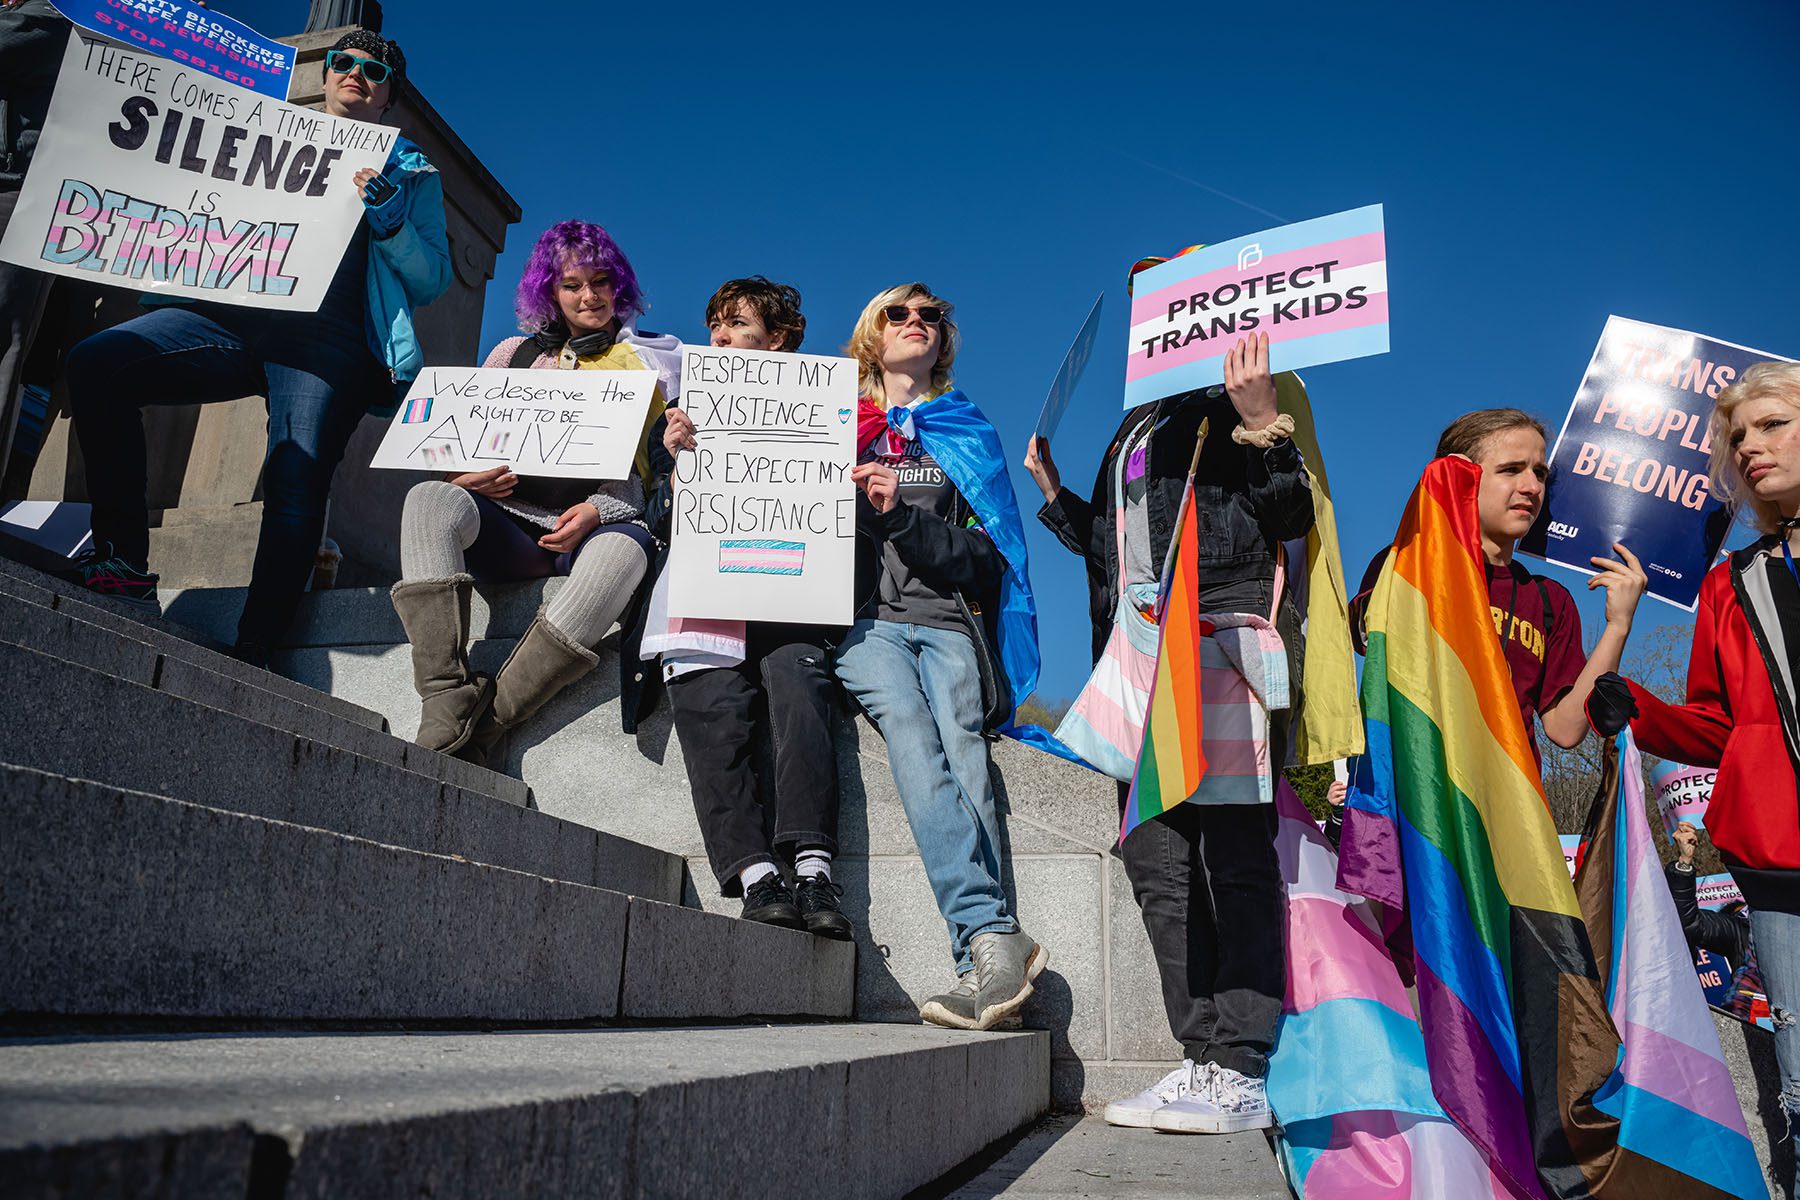 Demonstrators gather at a rally to protest the passing of anti-trans bills at the Kentucky State Capitol. They hold signs that read "We deserve to be alive," "There comes a time when silence is betrayal," "protect trans kids," and "Respect my existence or expect my resistance."